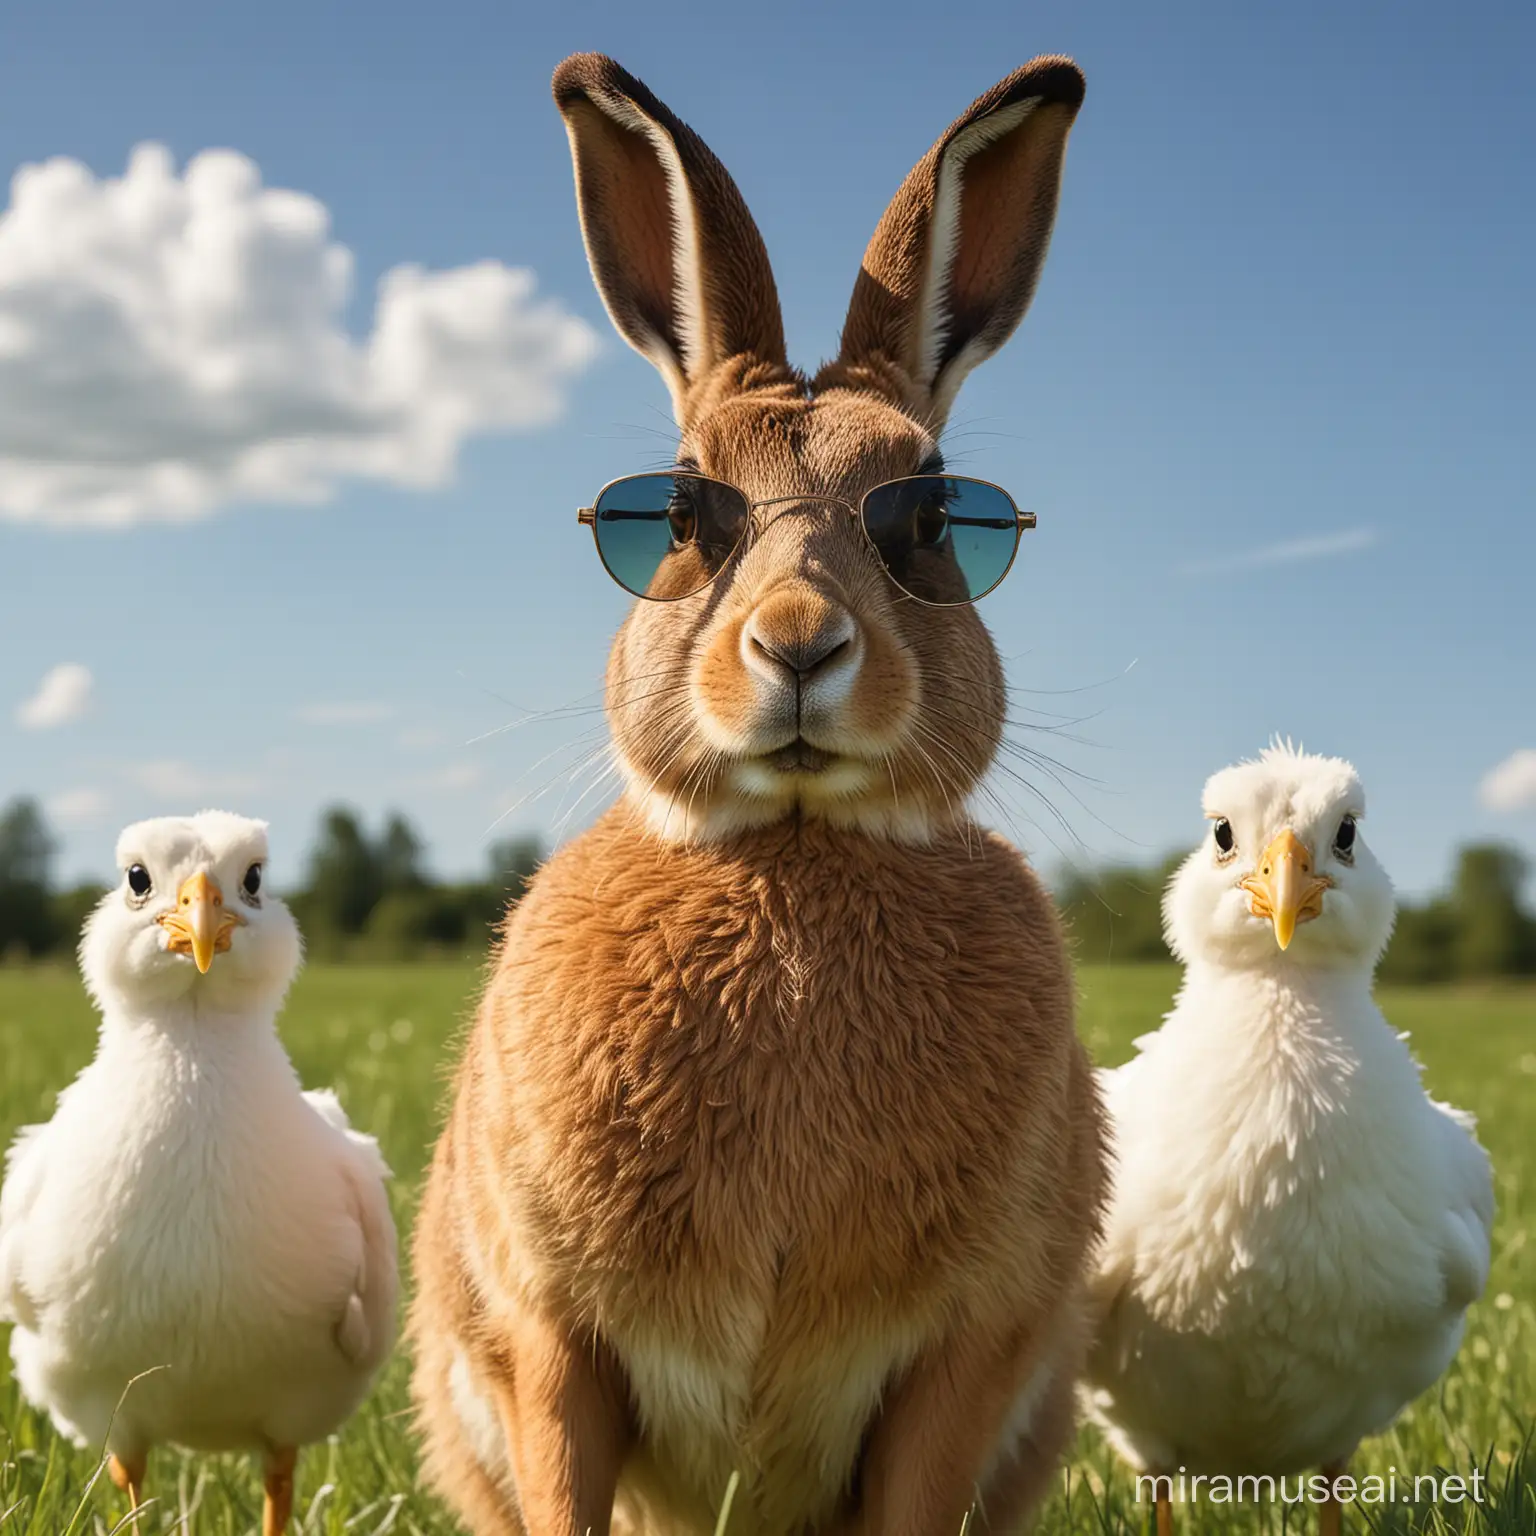 realist image of a complete brown hare wearing sunglasses looking frontal to the camera, at the right side three white Chicken, on a green meadow and a blue summer sky